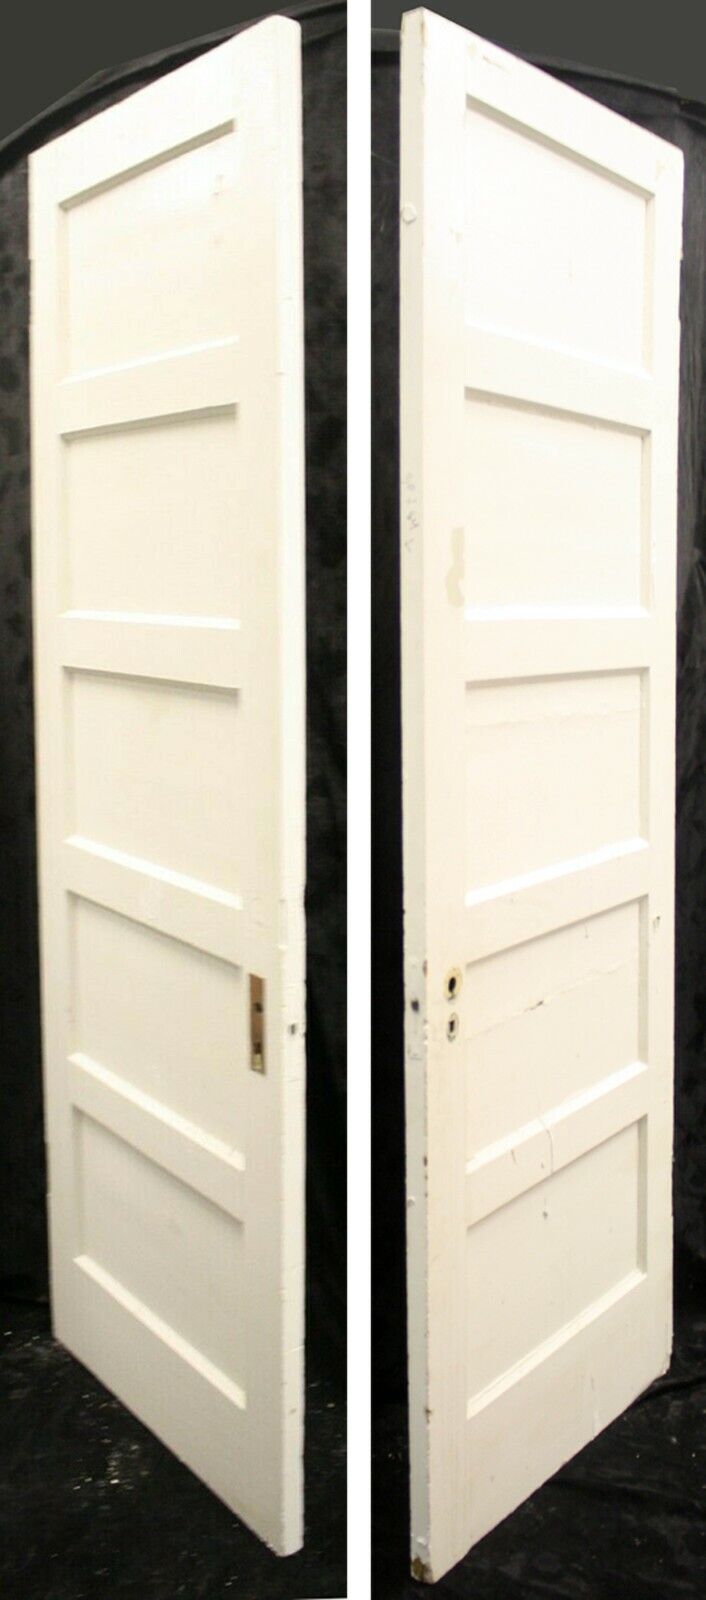 4 available 30"x83" Antique Vintage Old Salvaged Reclaimed Wood Wooden Interior Doors 5 Flat Panel